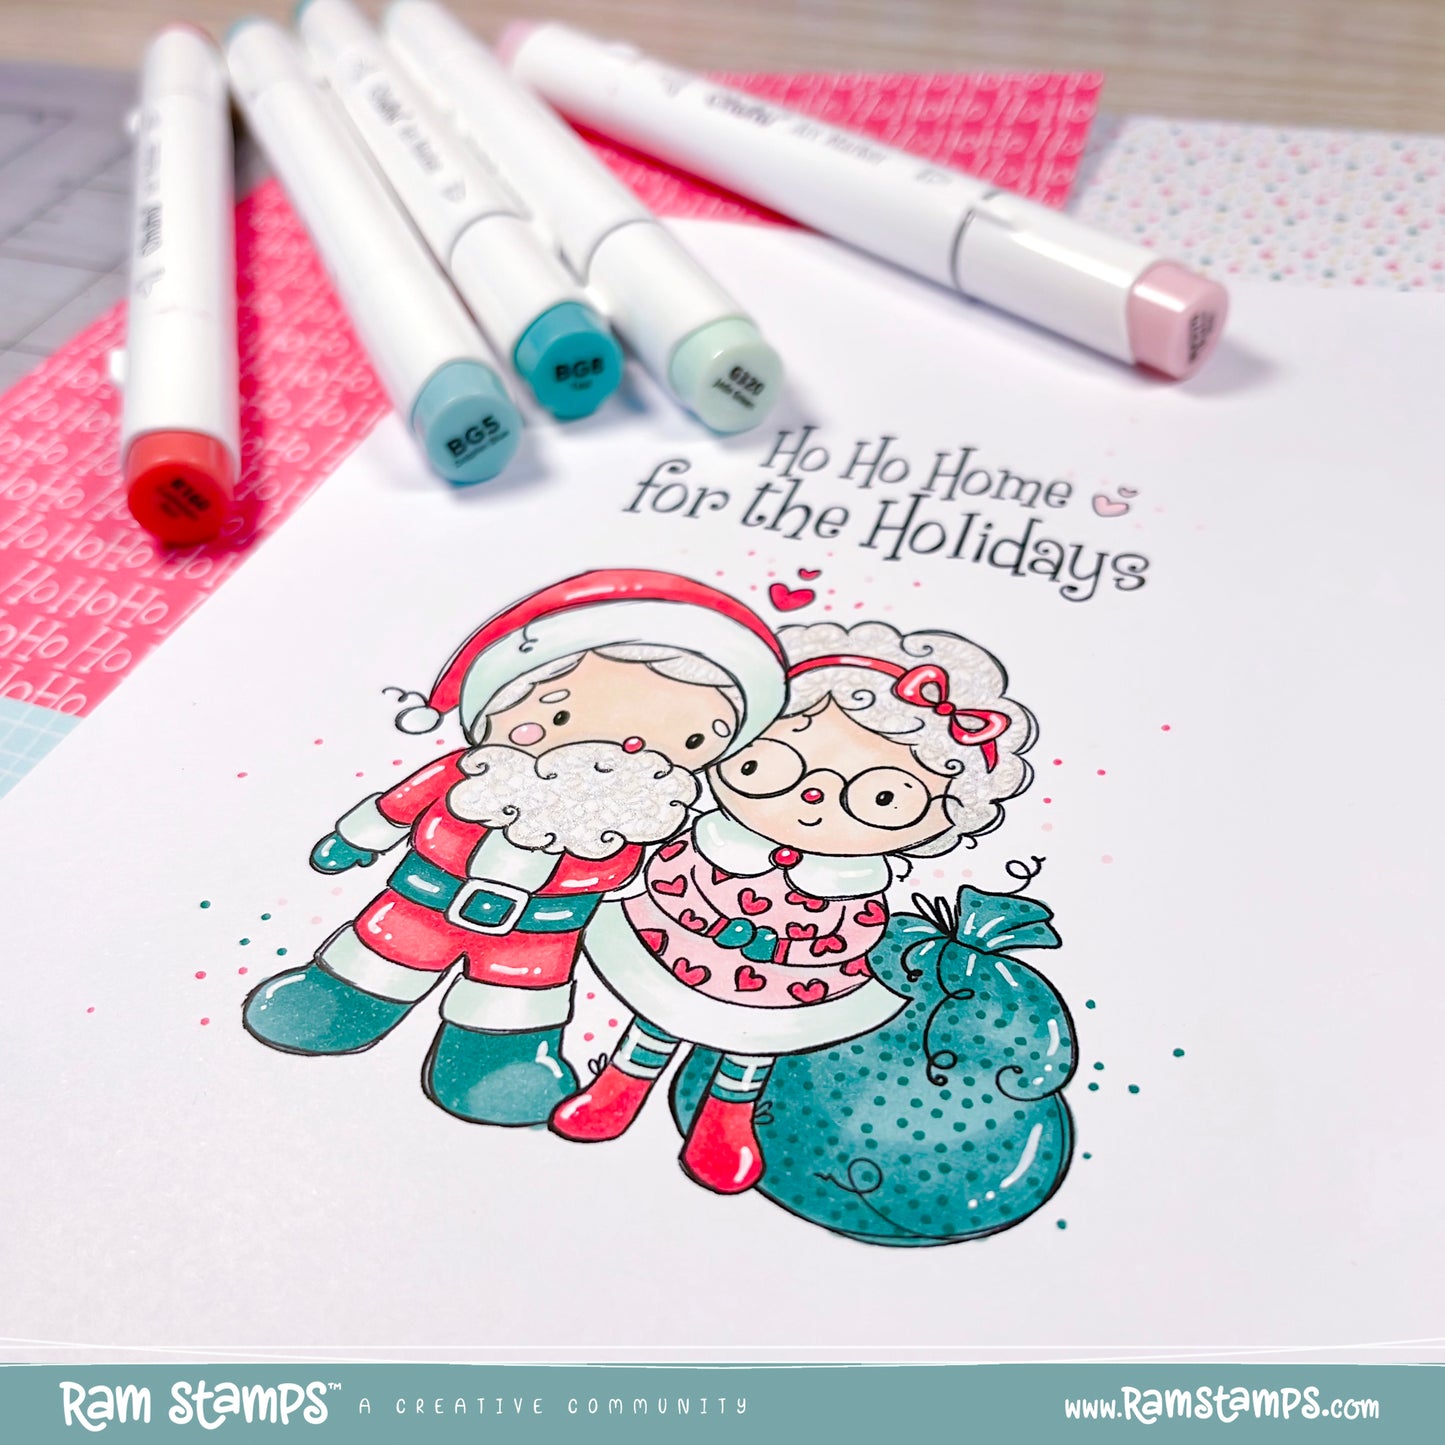 'Holly Jolly Christmas' Digital Pattern Paper Pack